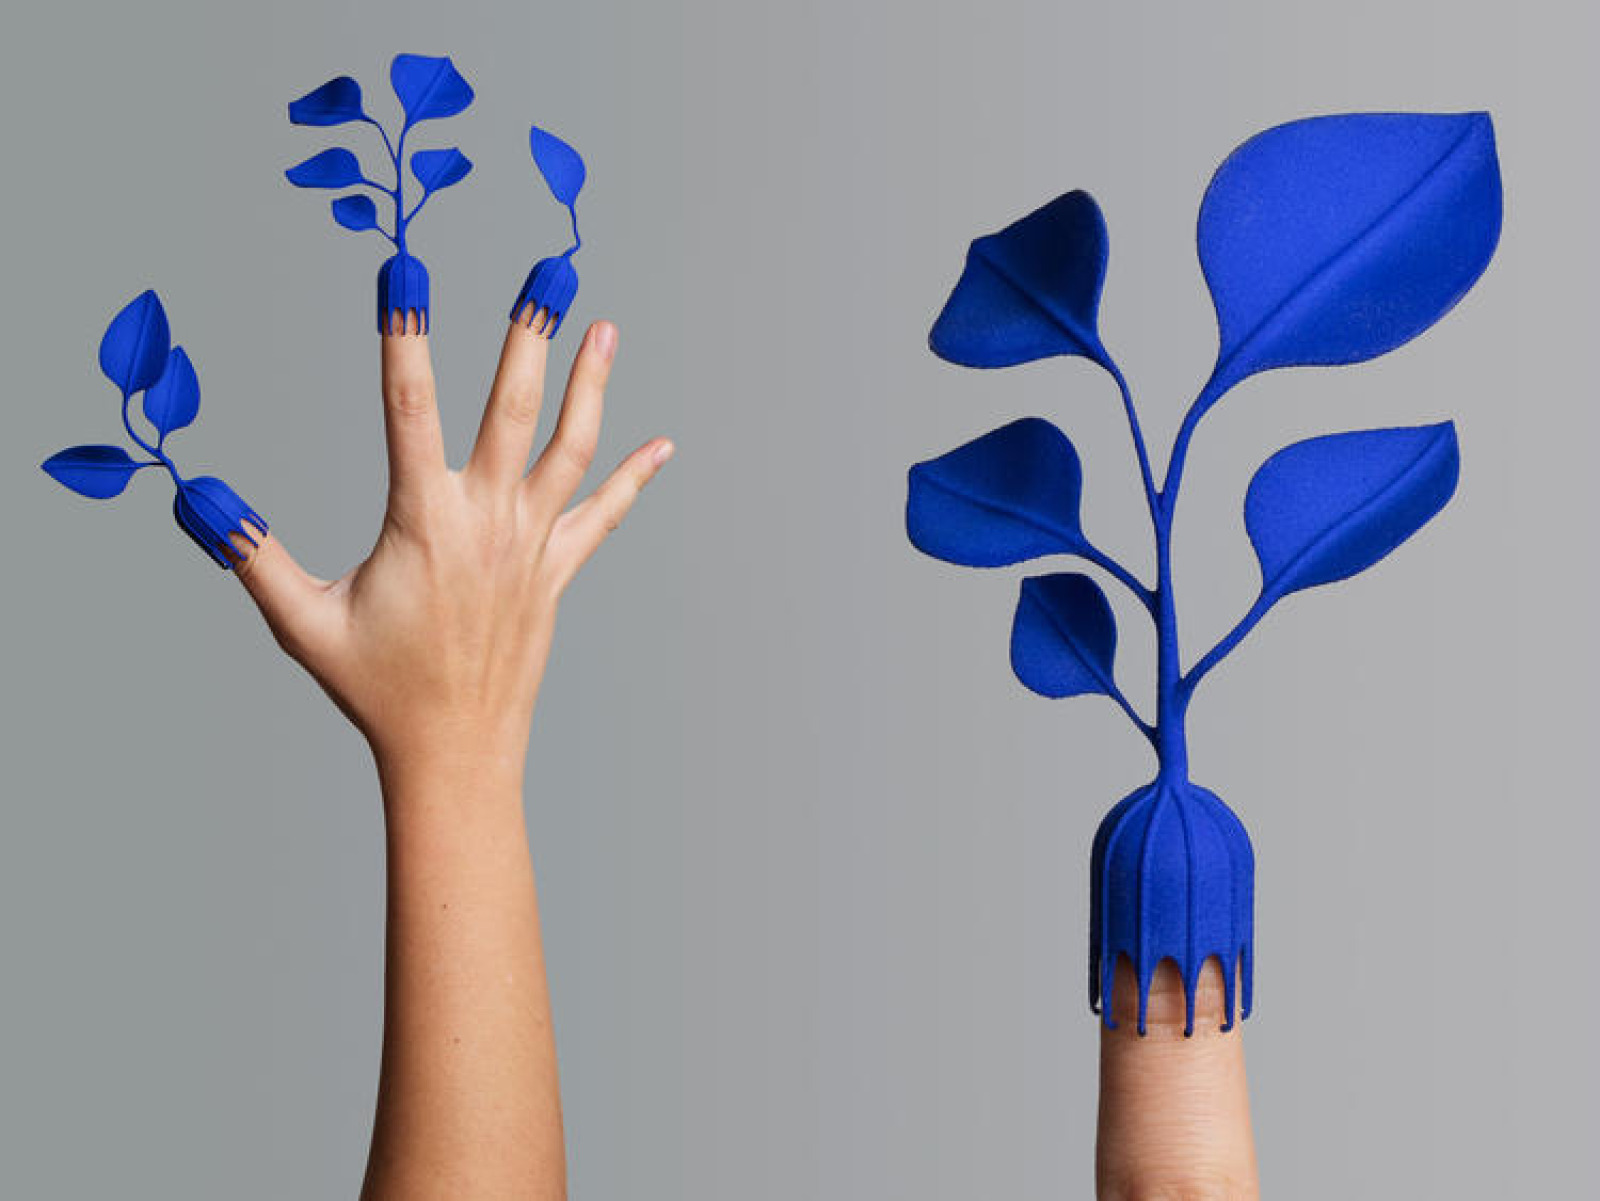 Fingers whose ends are decorated with blue leaves